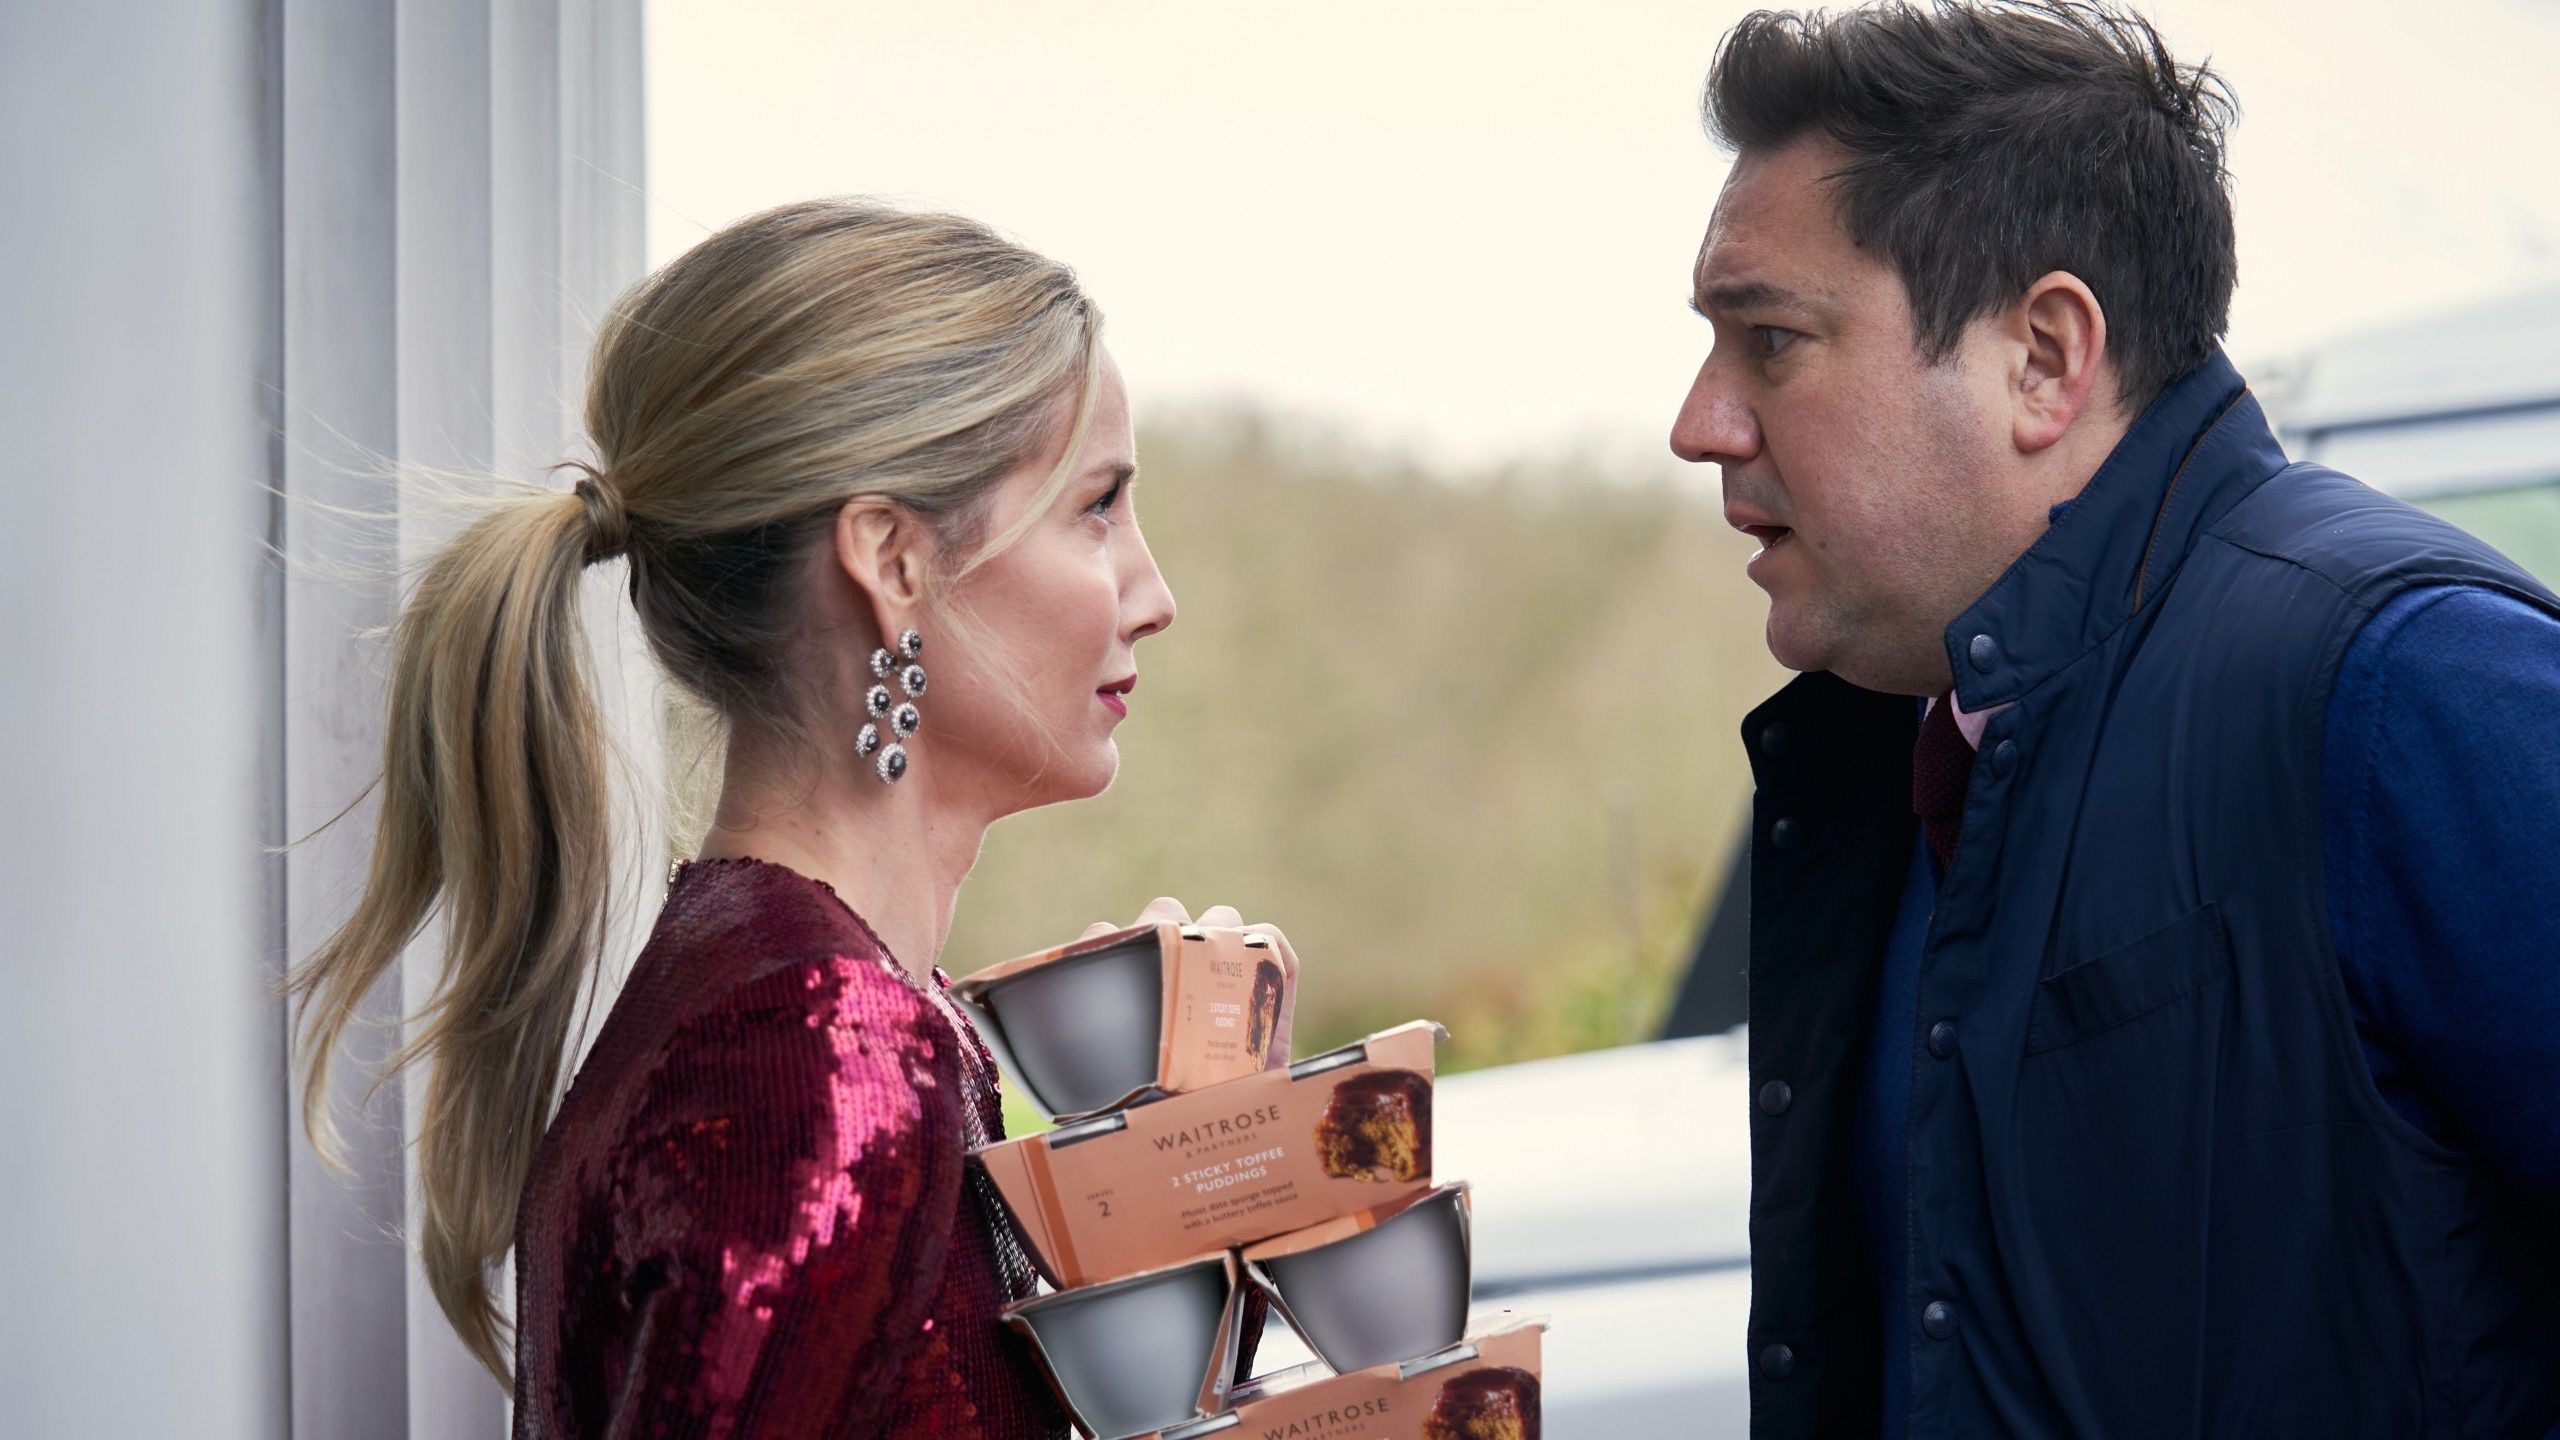 Annabelle Wallis and Rufus Jones stare at each other awkwardly as they bring in groceries to a seemingly normal holiday get together as seen in the dark comedy SILENT NIGHT. 